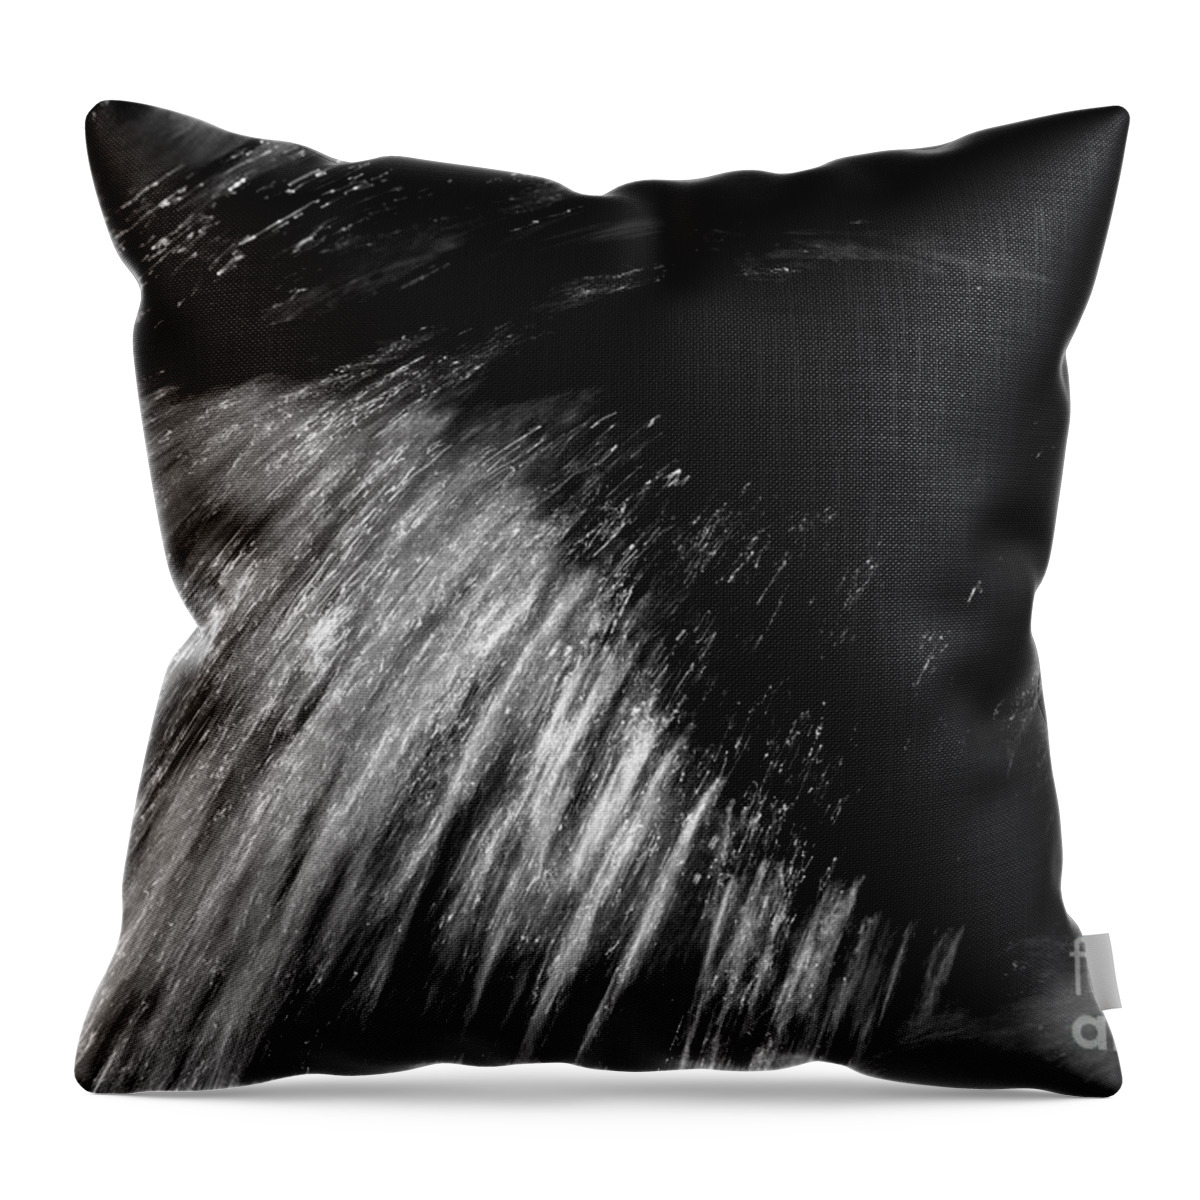 Landscapes Throw Pillow featuring the photograph Zion Waterfall by John F Tsumas